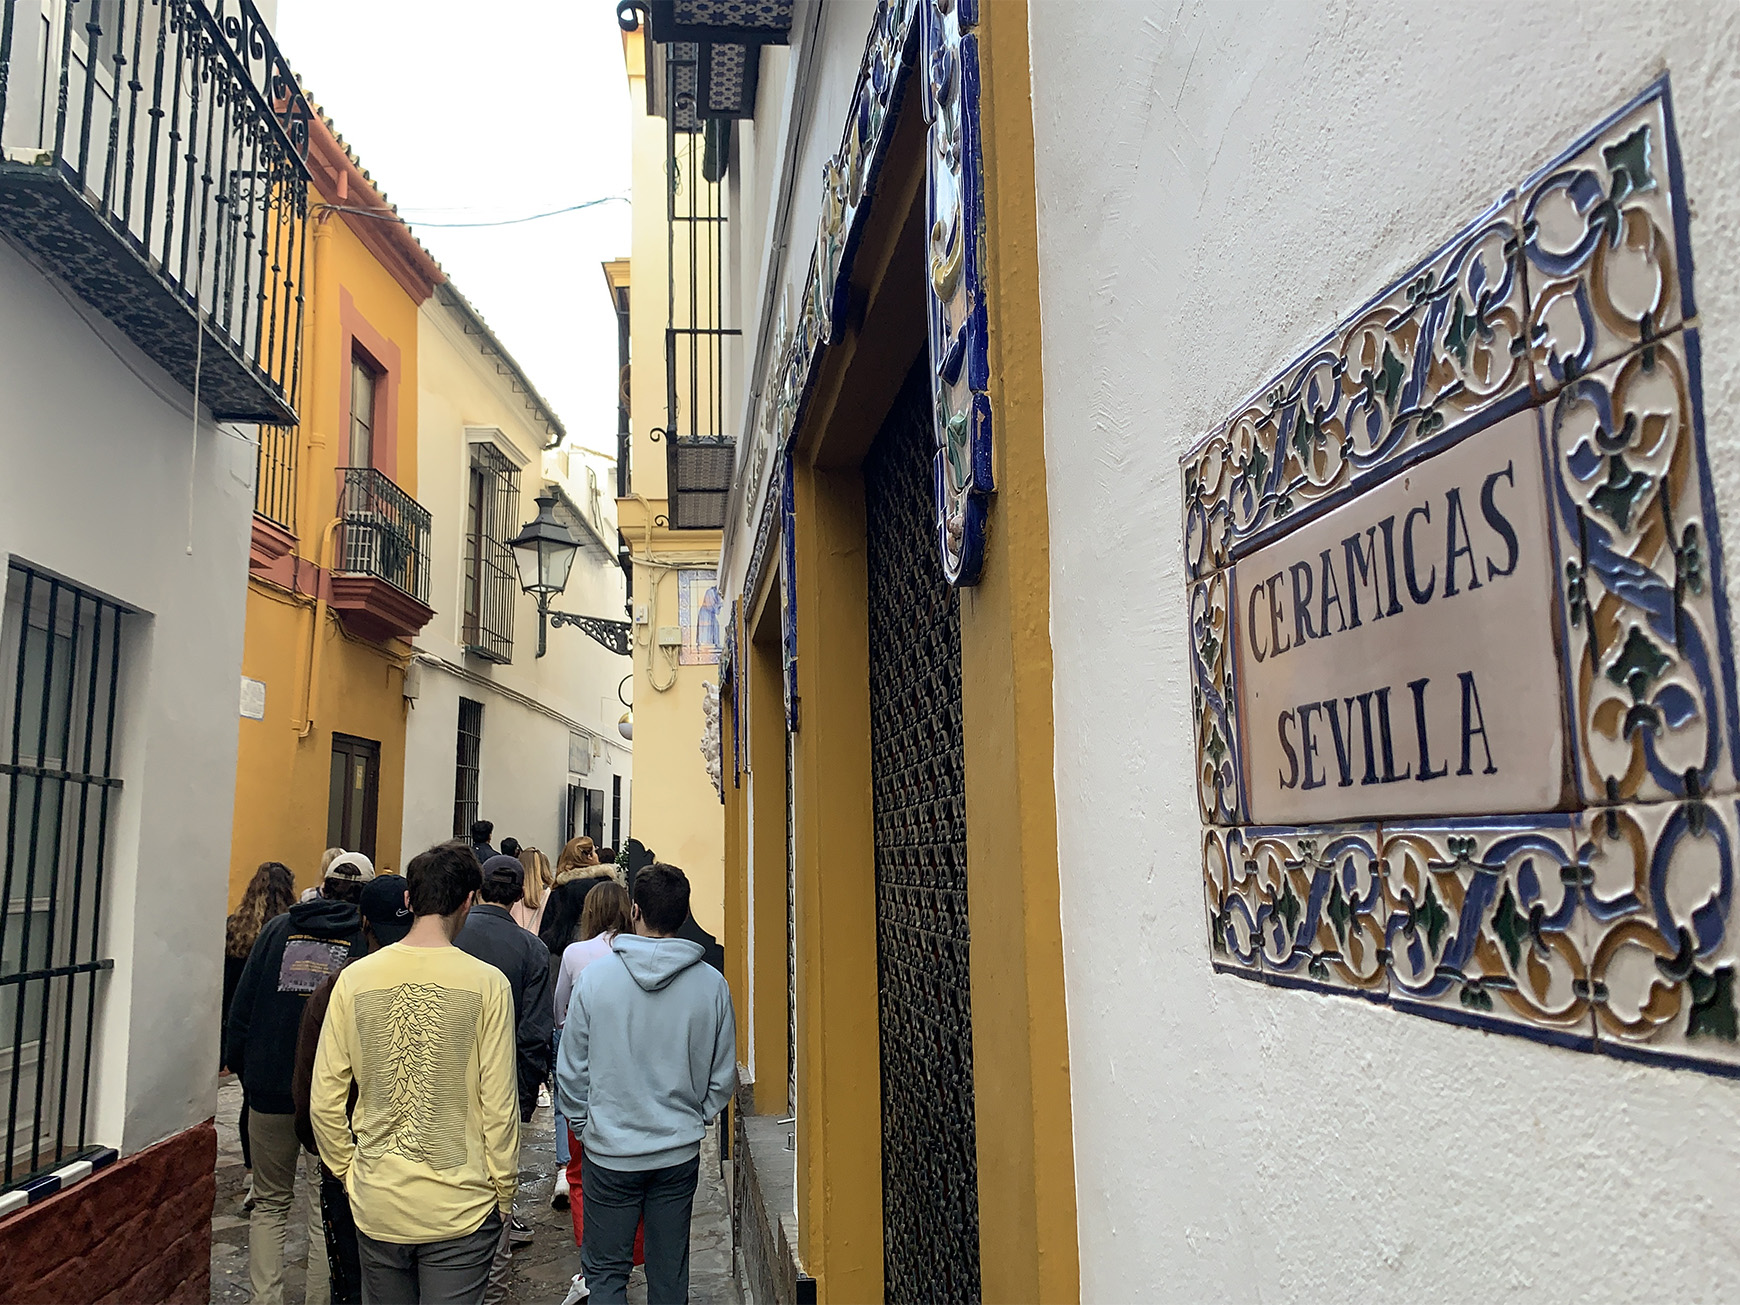 Study abroad in Seville, Spain with IFSA